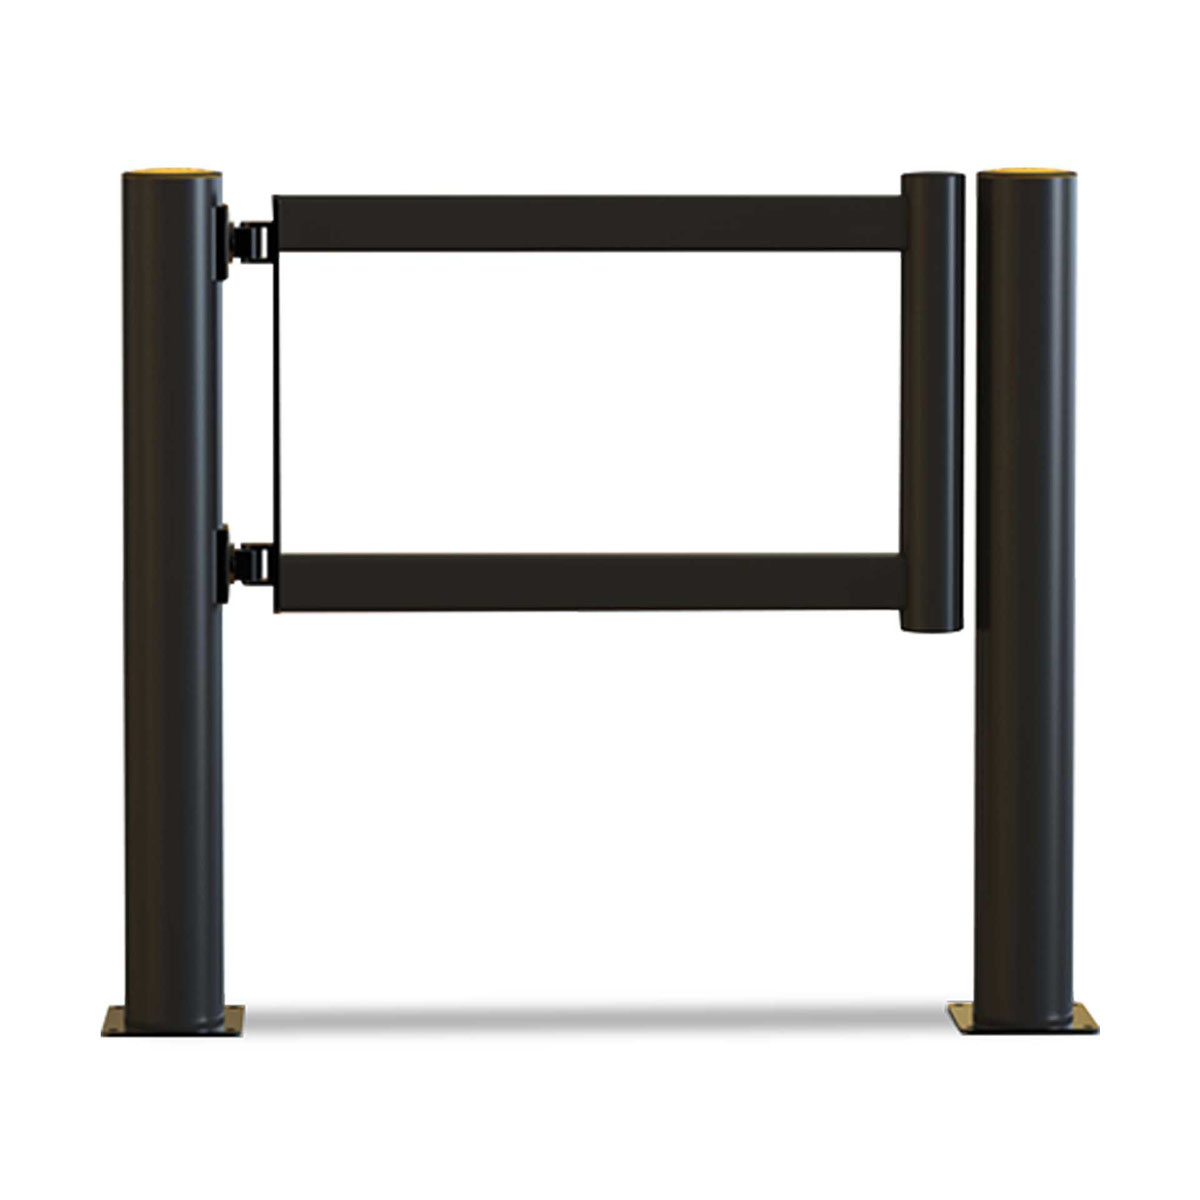 Buy Swing Gate - A-Safe (Flexible Plastic) in Traffic Barriers from A-Safe available at Astrolift NZ